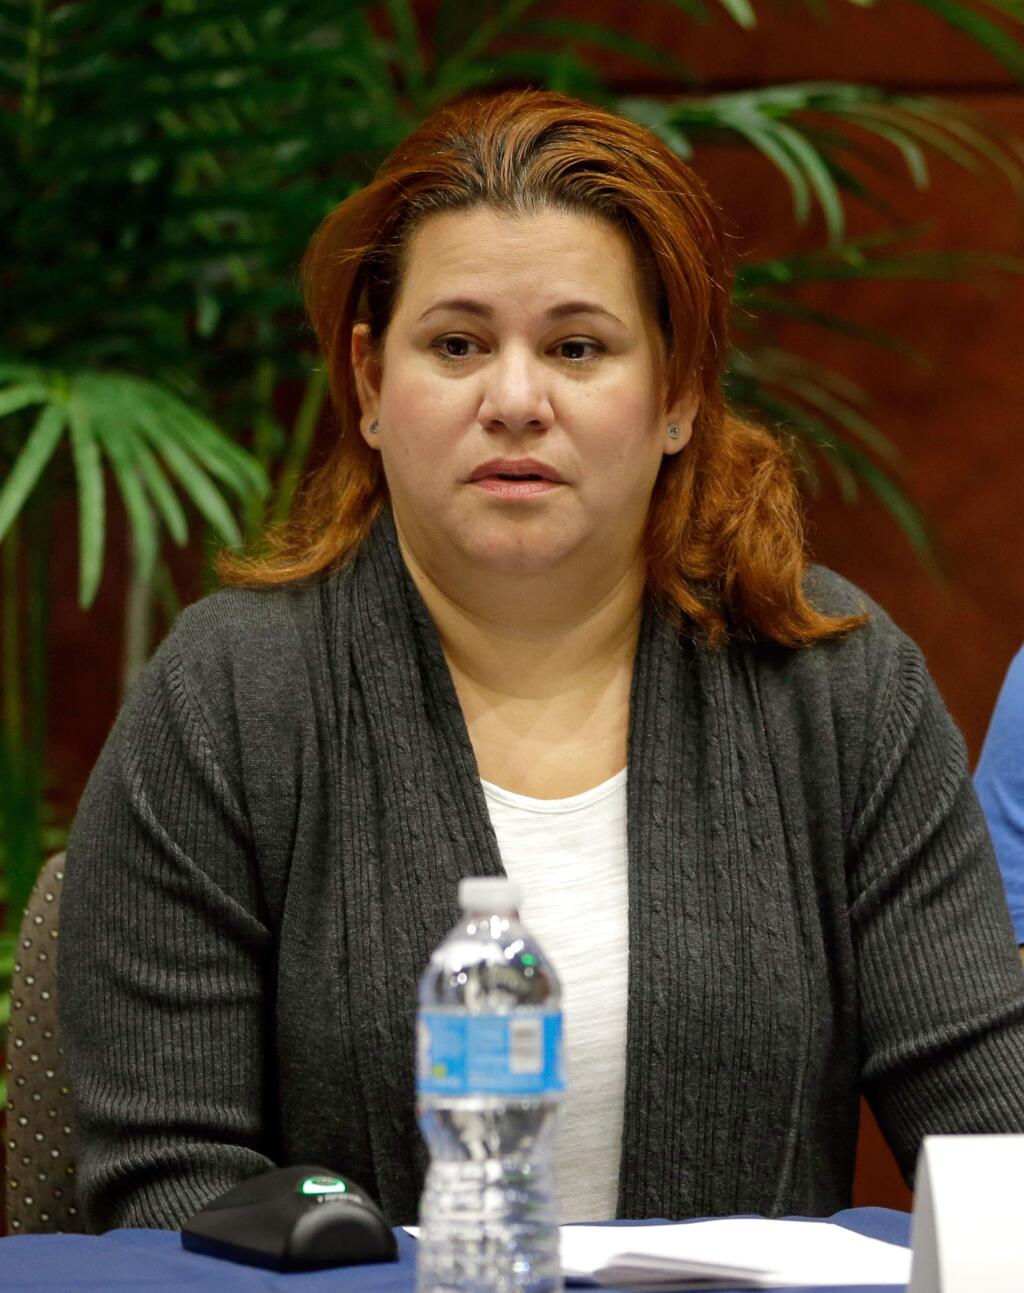 The mother of Sebastian DeLeon, Brunilda Gonzalez, speaks at a news conference at Florida Hospital, Tuesday, Aug. 23, 2016, in Orlando, Fla. Gonzalez's son Sebastian has survived a brain-eating amoeba that kills most people who contract it after he was treated at the hospital. (AP Photo/John Raoux)